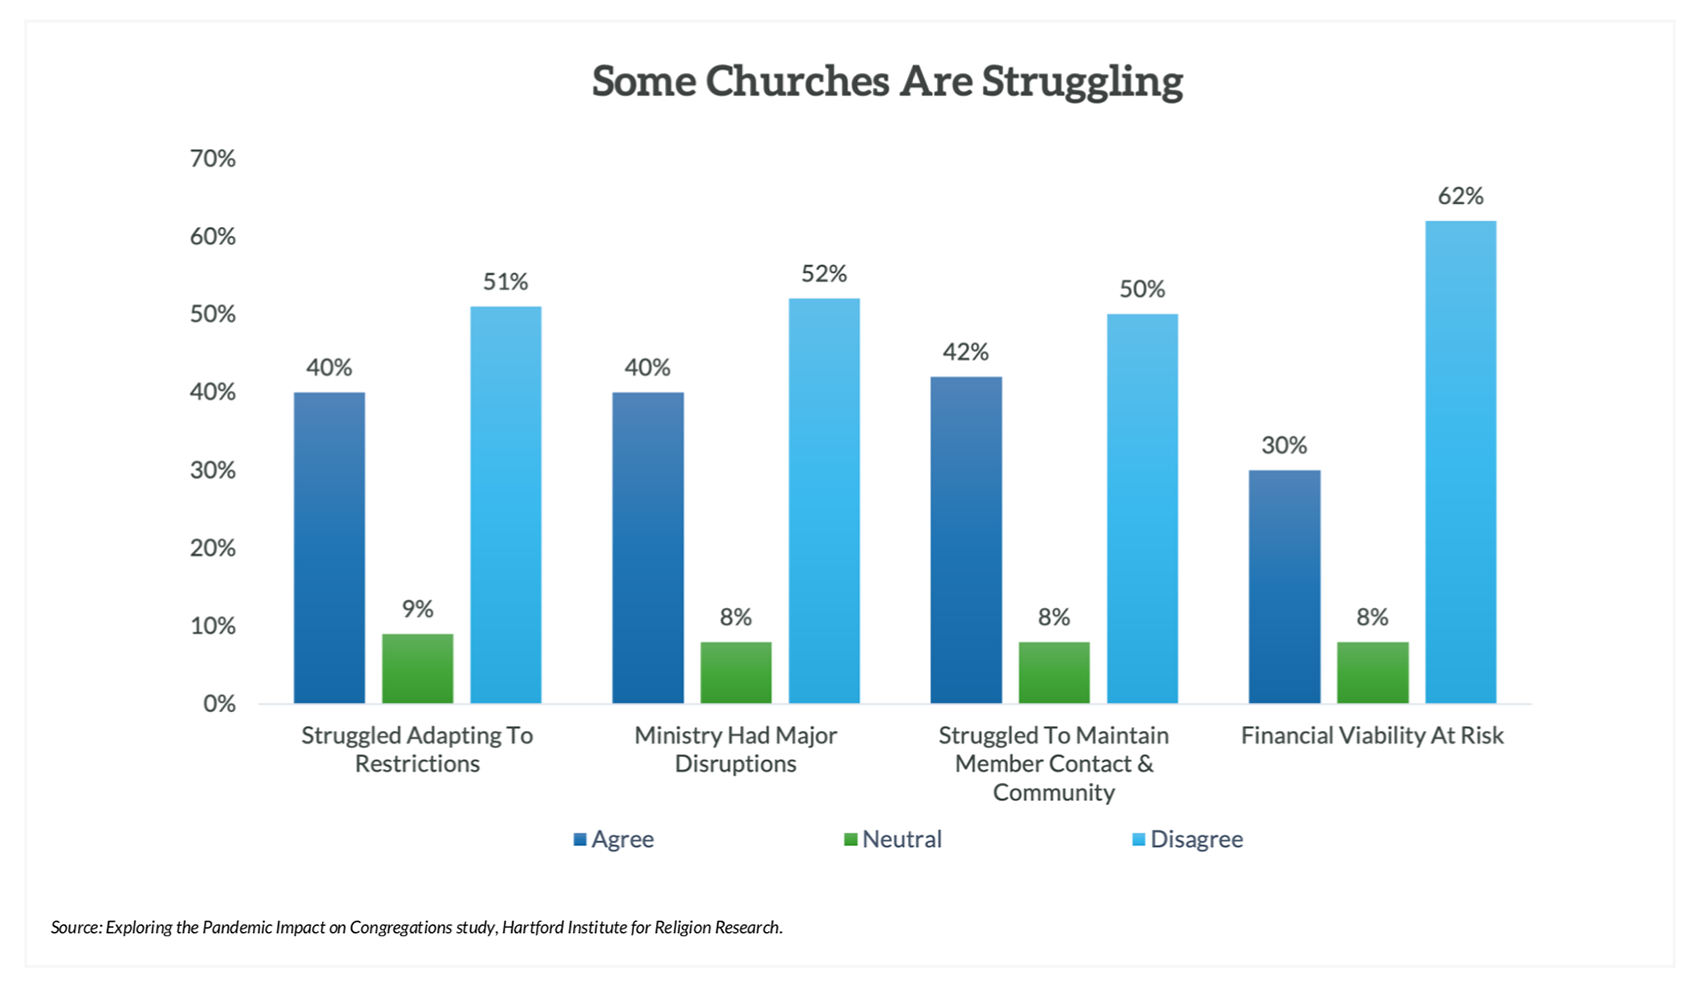 "Some Churches Are Struggling" Graphic courtesy of HIRR